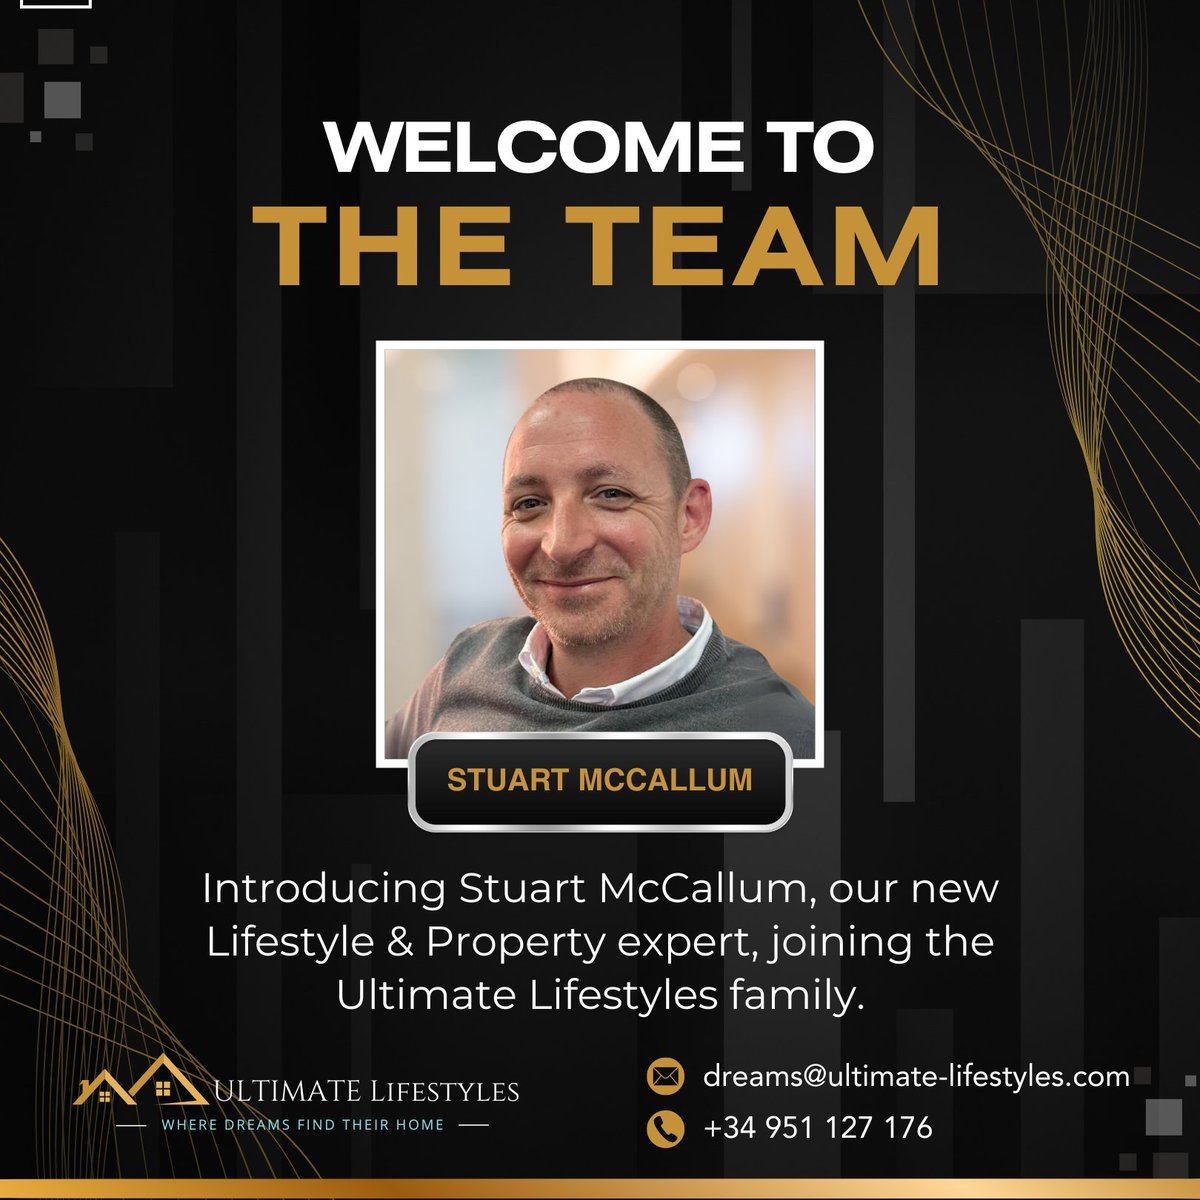 Introducing Stuart McCallum, our new Lifestyle & Property expert, joining the Ultimate Lifestyles family. 

With his profound knowledge of the Costa del Sol and his unwavering dedication to client satisfaction.

#NewTeamMember #WelcomeStuart #UltimateLifestyles #PropertyExpert